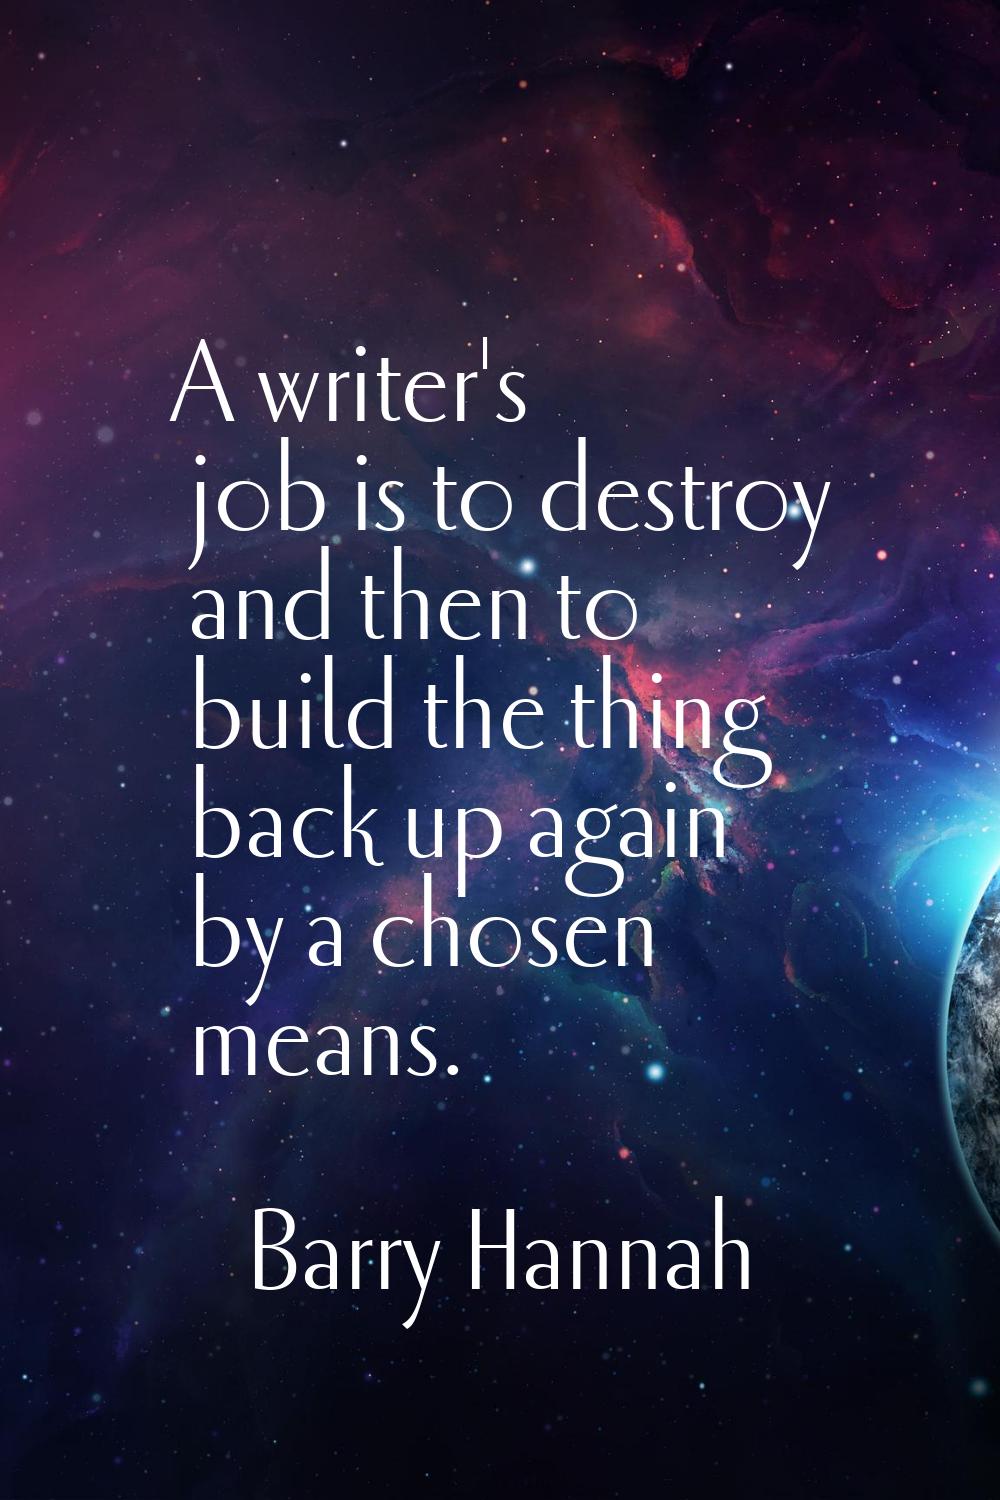 A writer's job is to destroy and then to build the thing back up again by a chosen means.